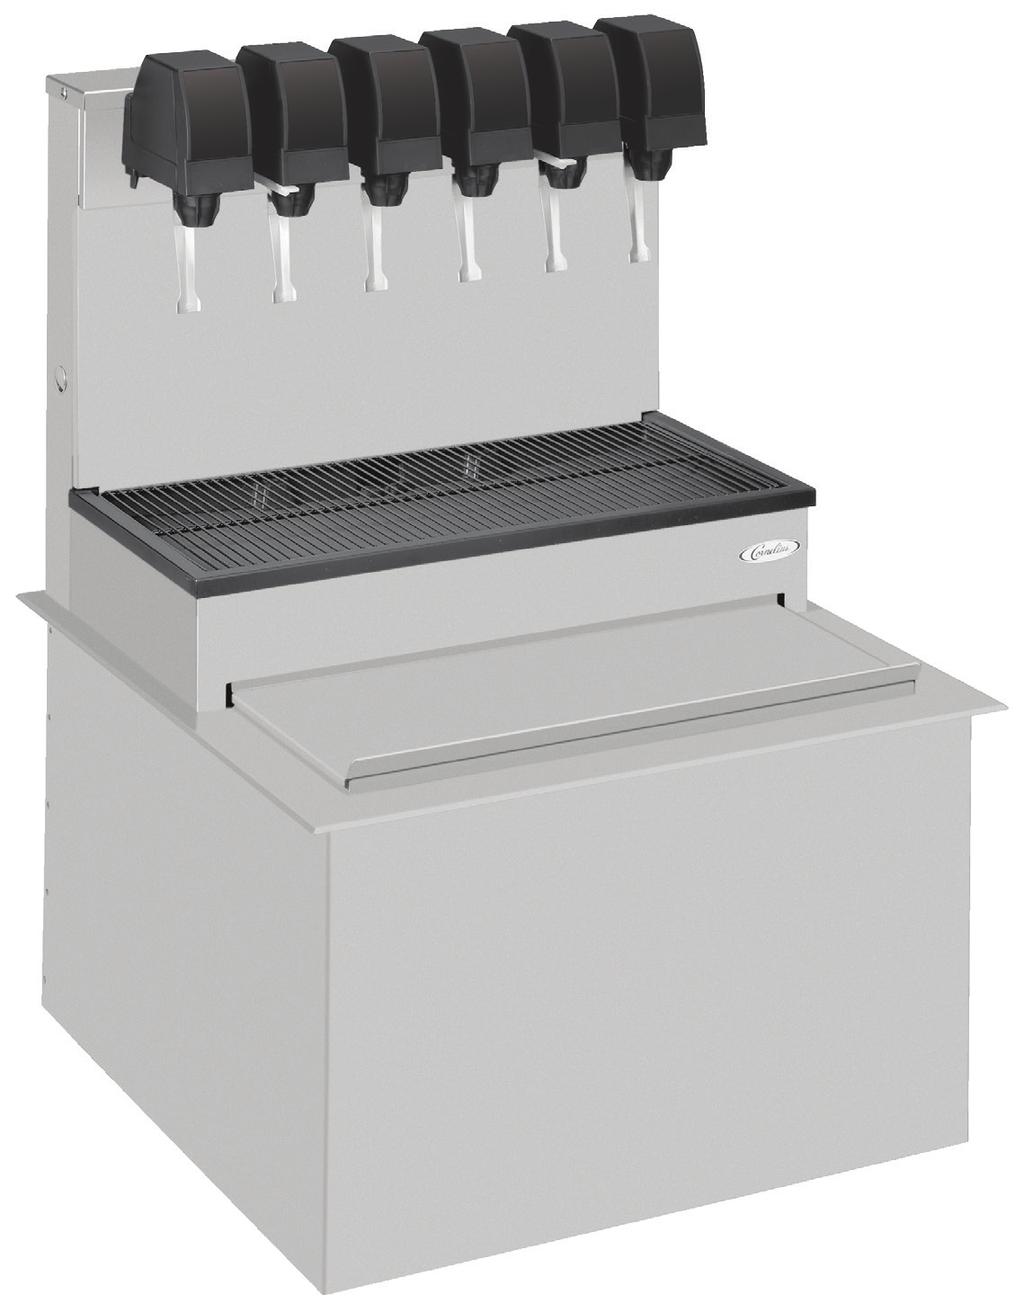 2323 UNIVERSAL POST-MIX DROP-IN DISPENSER FEATURES Large ice capacity - Ice chest has 80 lb capacity Options - Available with 5, 6, or 8 valves (8 valve has 2 ambient syrups and 6 chilled syrups)